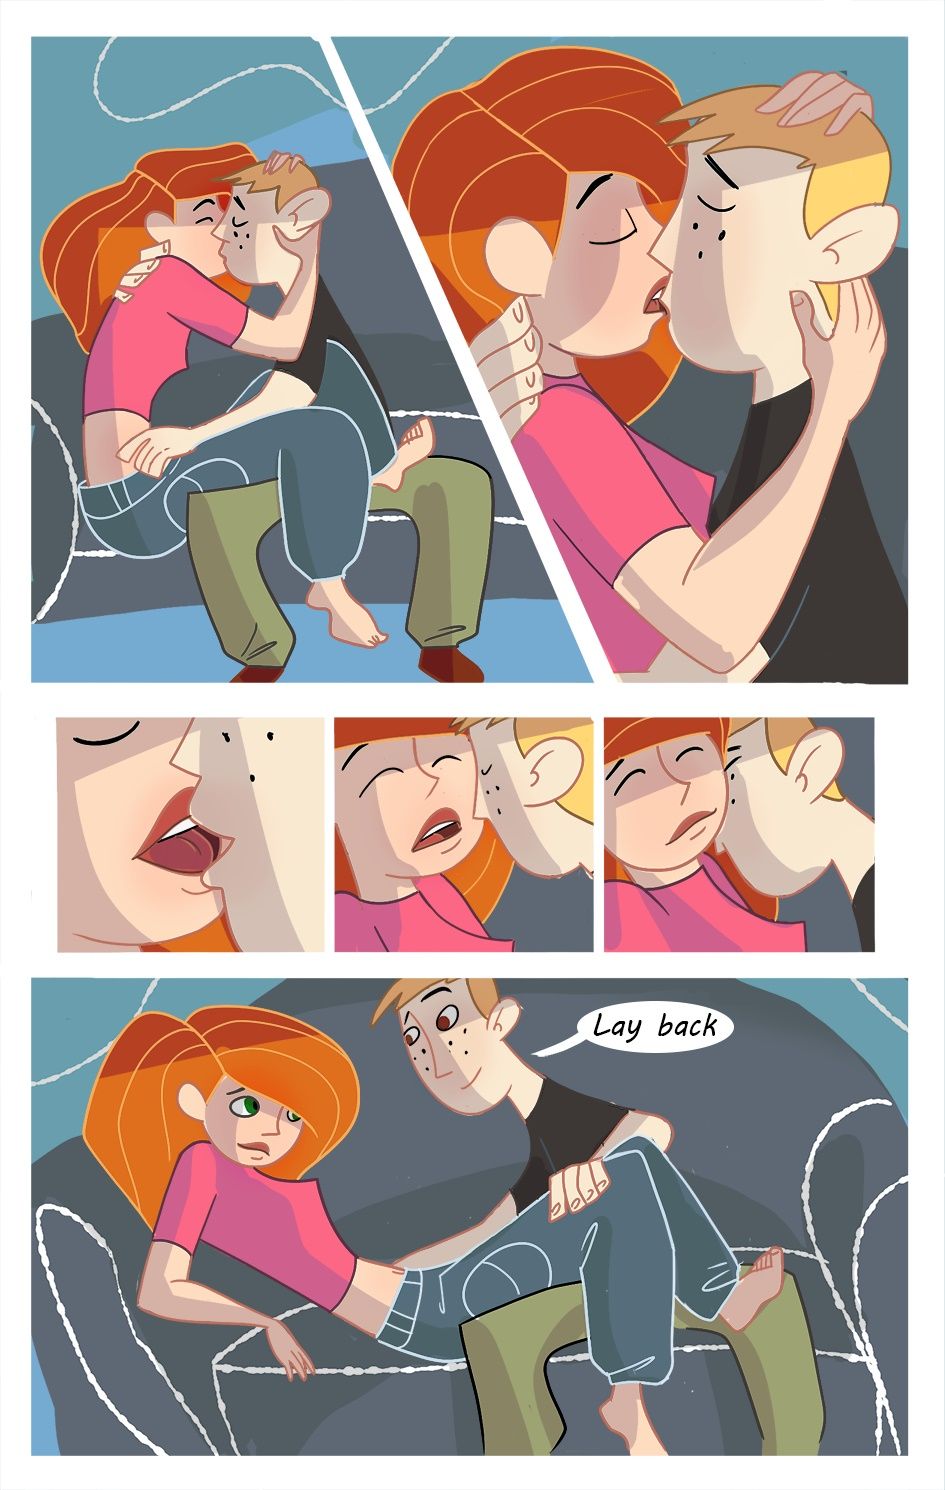 [Uanonkp] The Couch (Kim Possible) 5